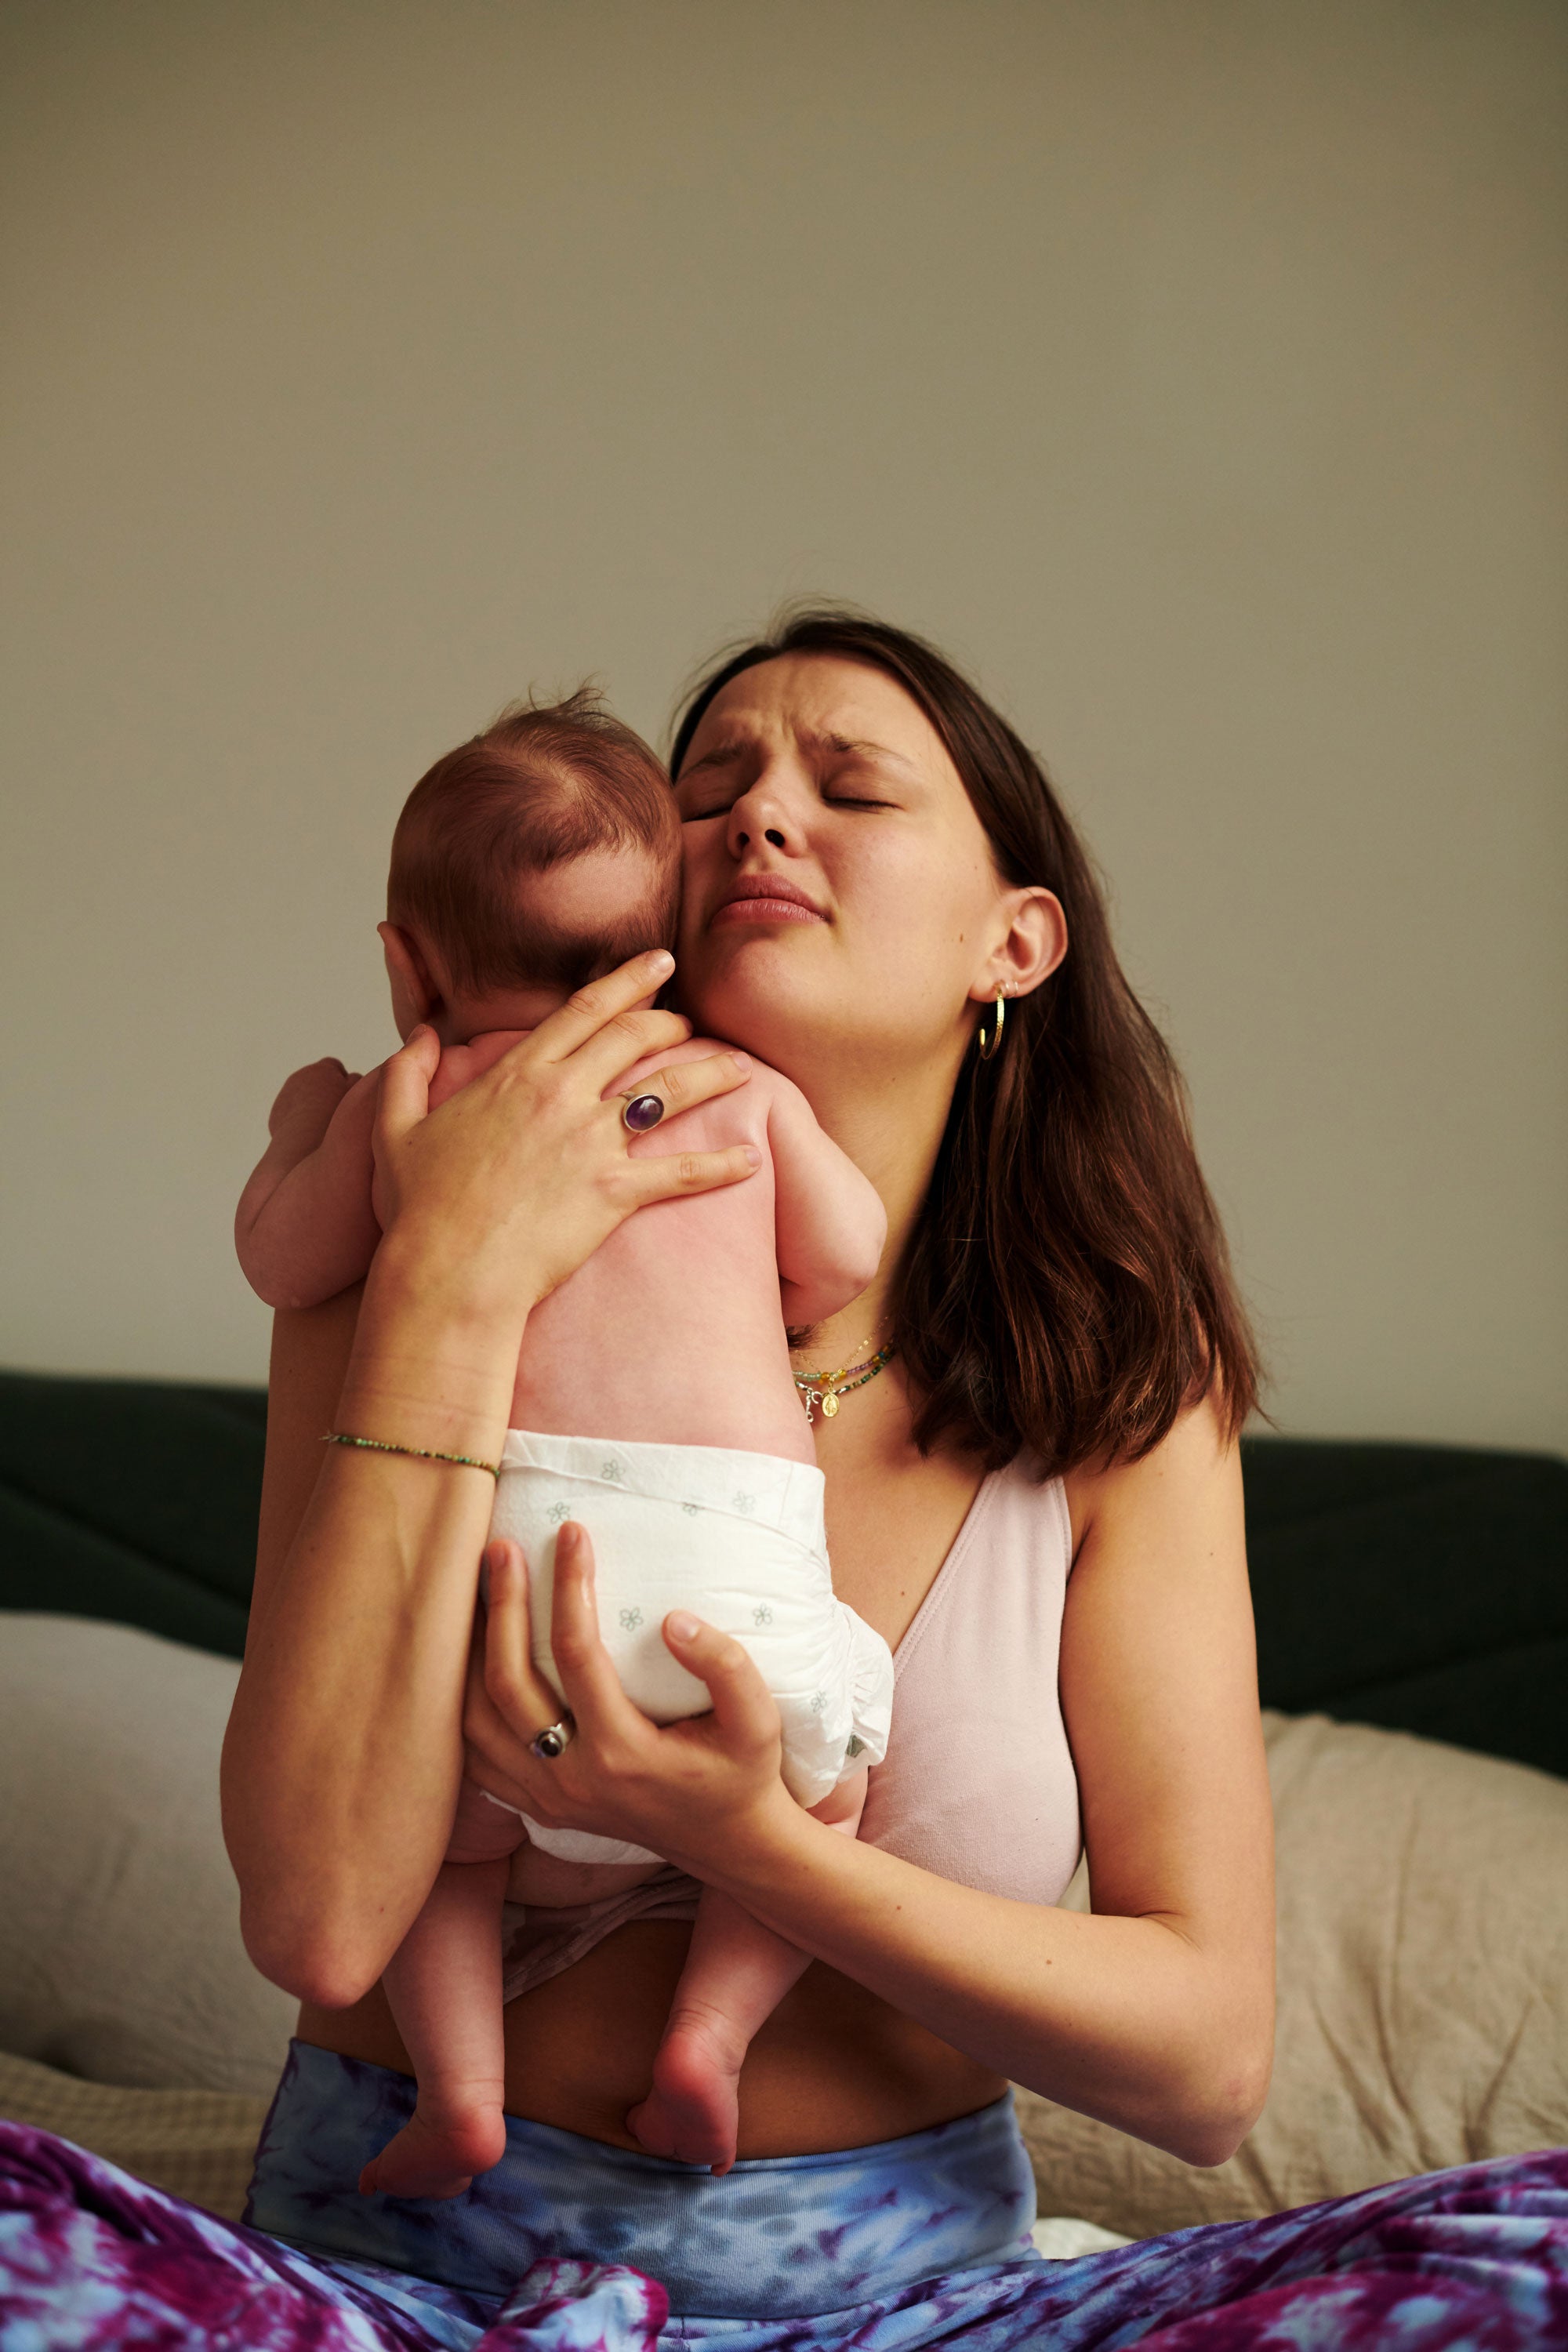 Milking Small Tit Lactating Moms - The Intimate Realities Of Breastfeeding â€“ Photos